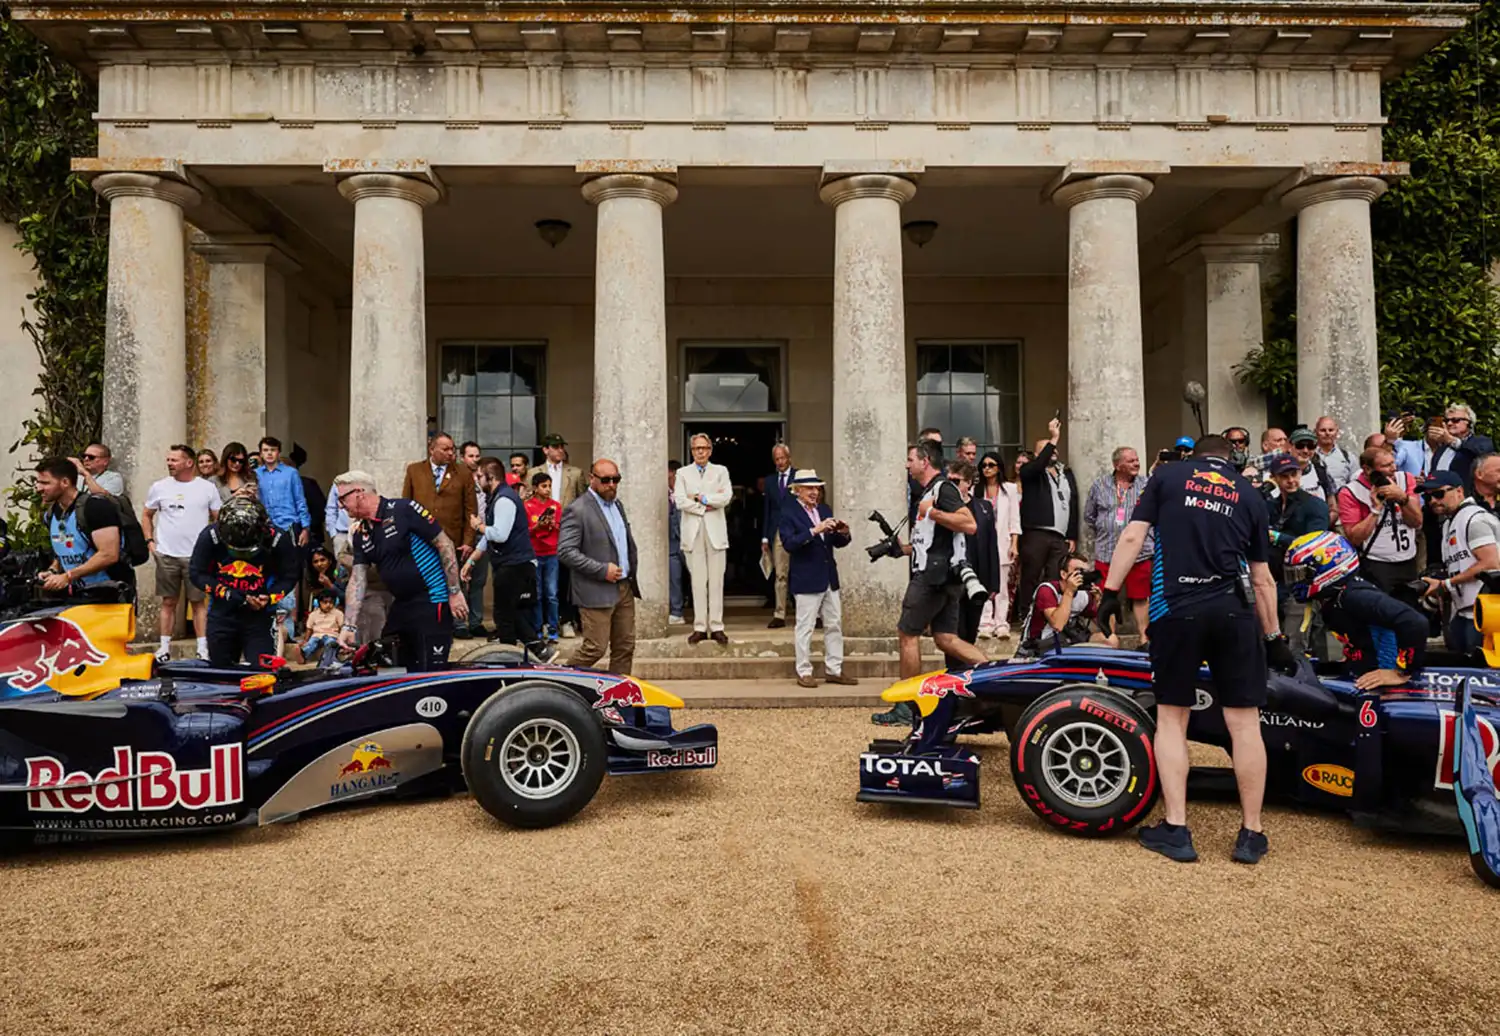 Red Bull Racing Continues to Make History at Goodwood Festival of Speed